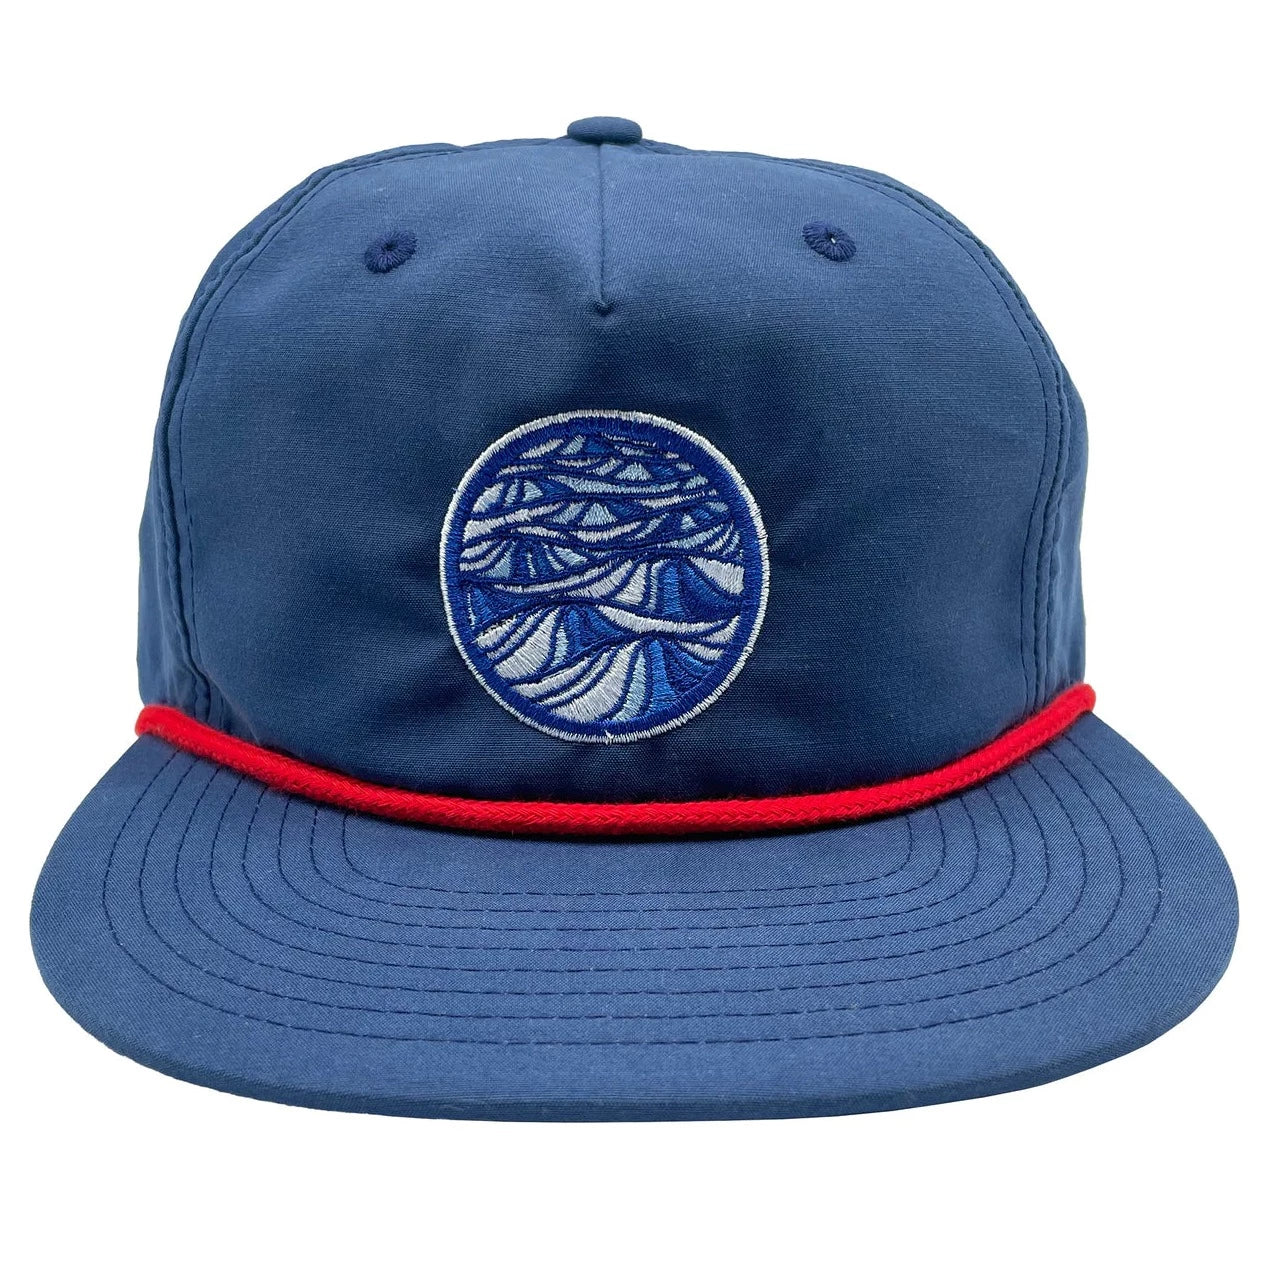 Pacific Swell 5 Panel Unstructured Hat